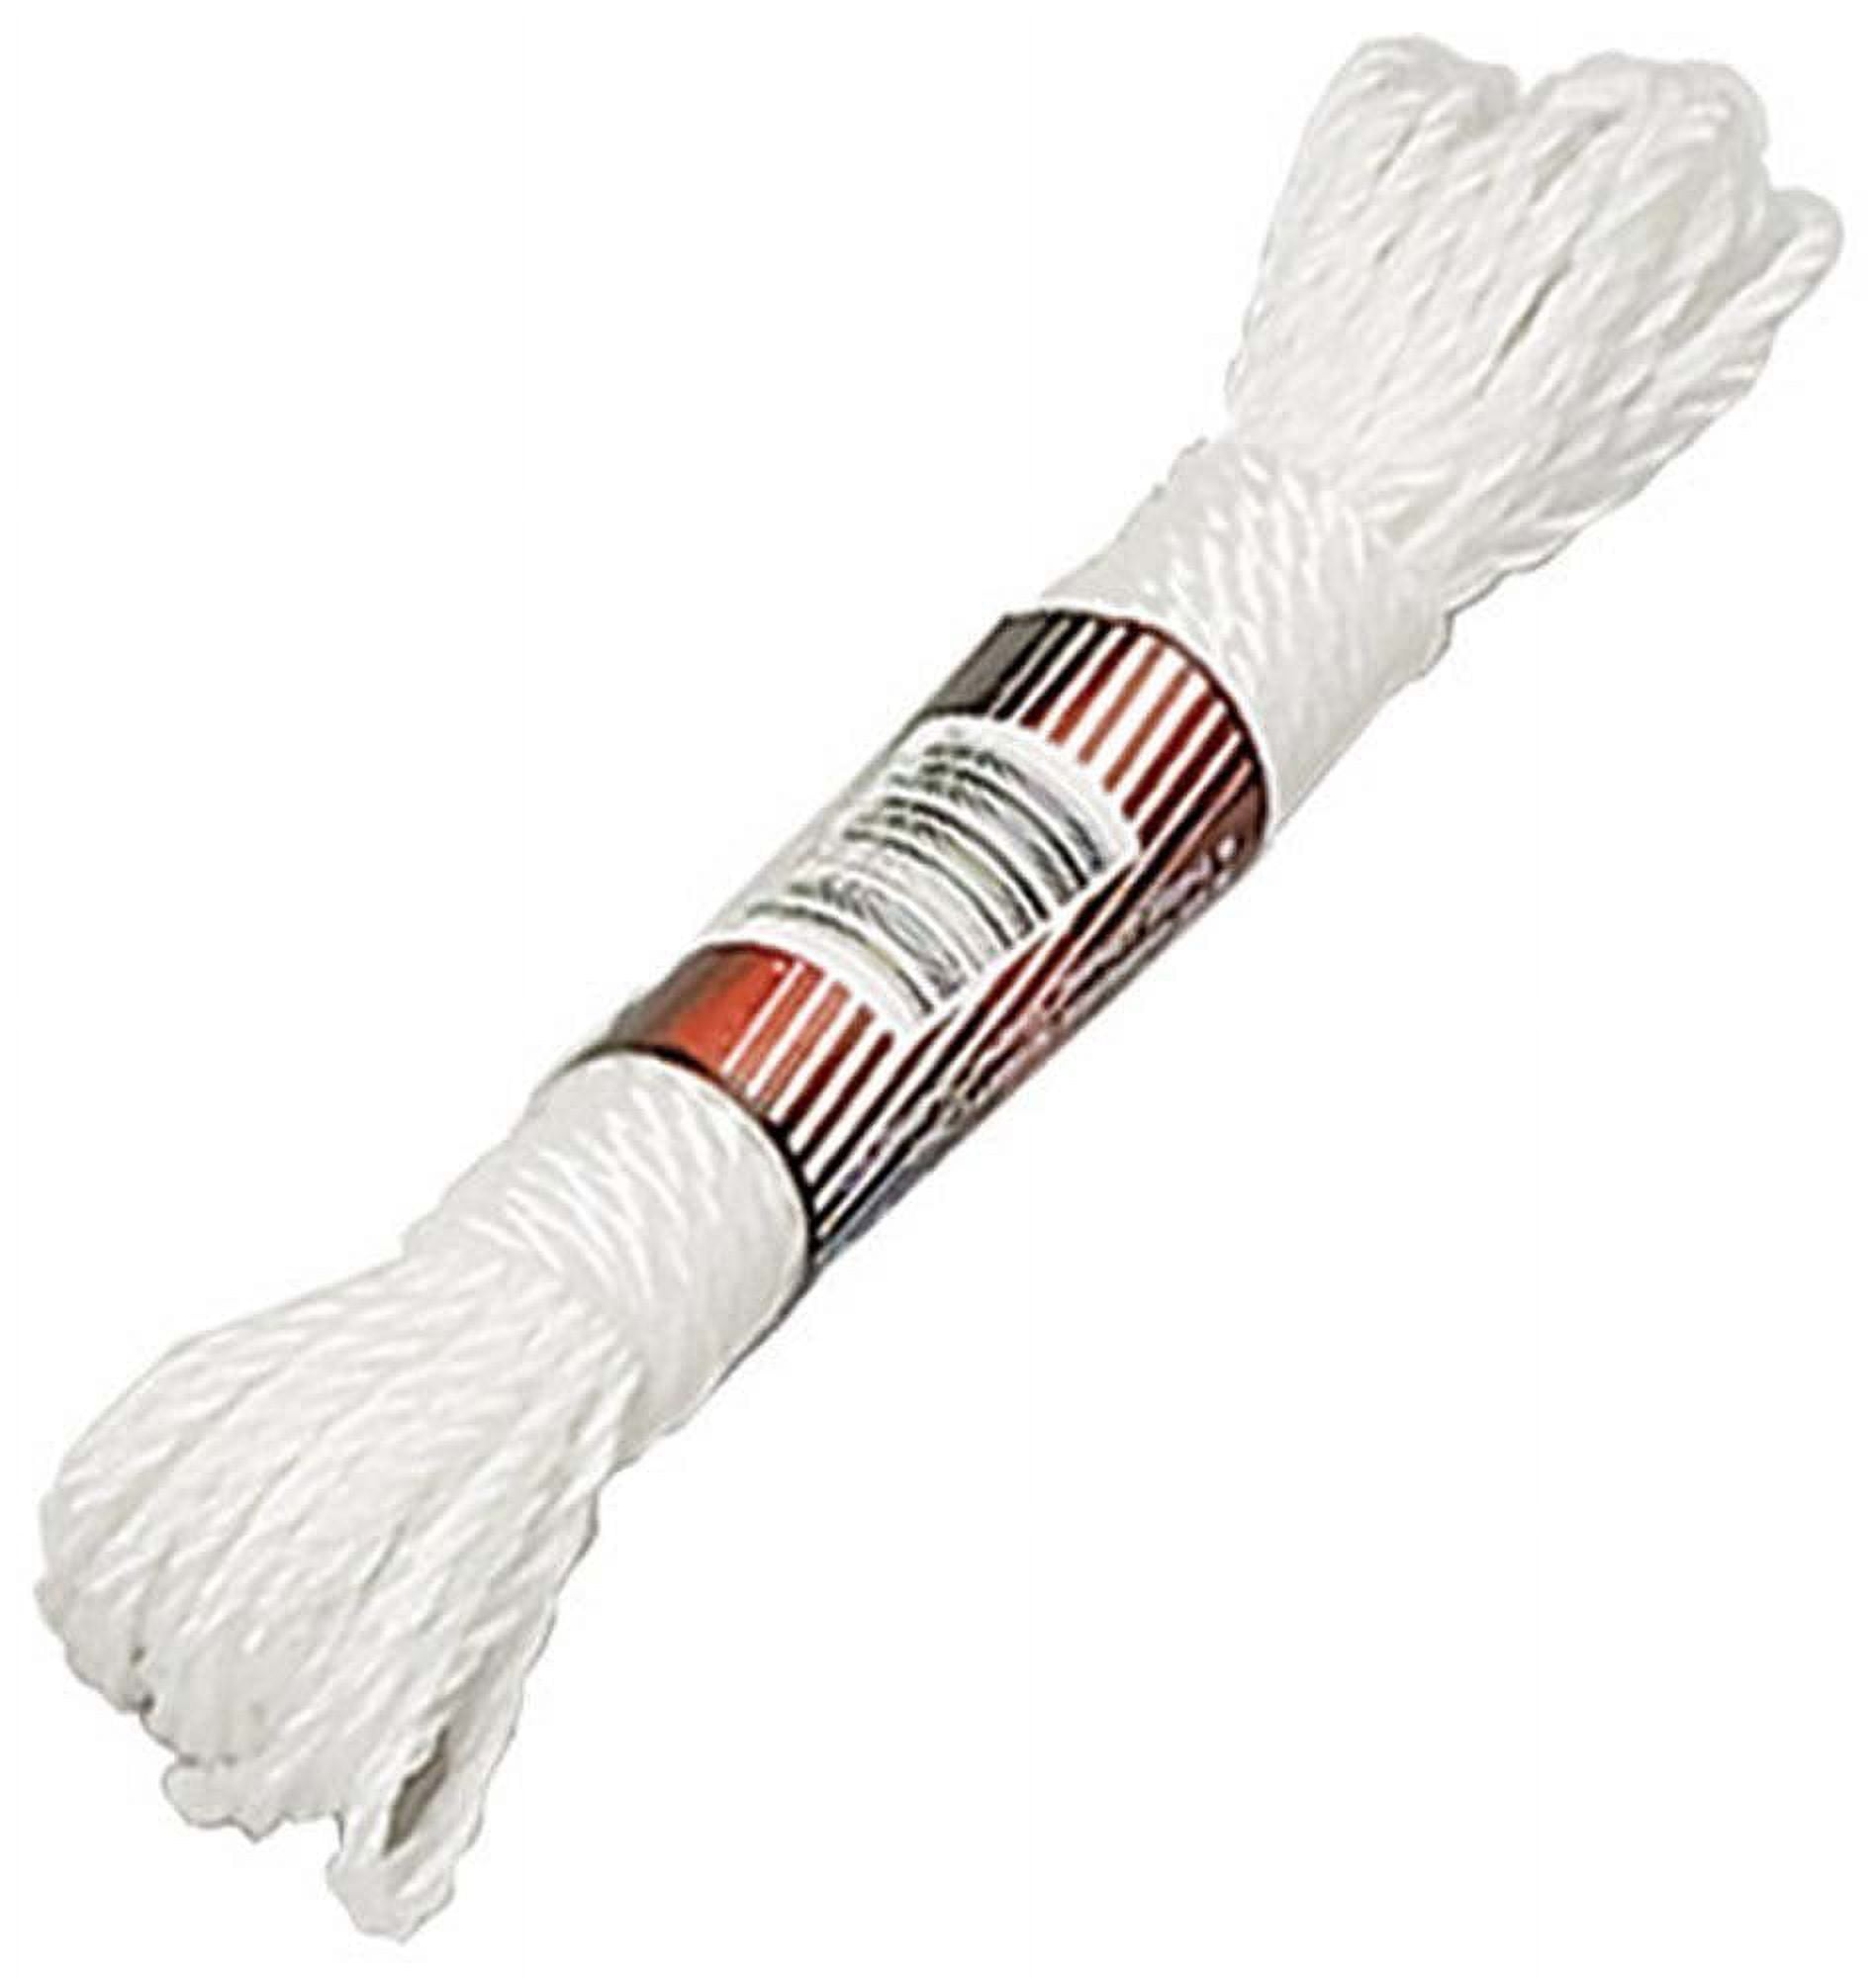 HAWK 50 Foot (15.2 m) Durable White Polypropylene Rope, ⅛ (0.3 cm)  Thickness